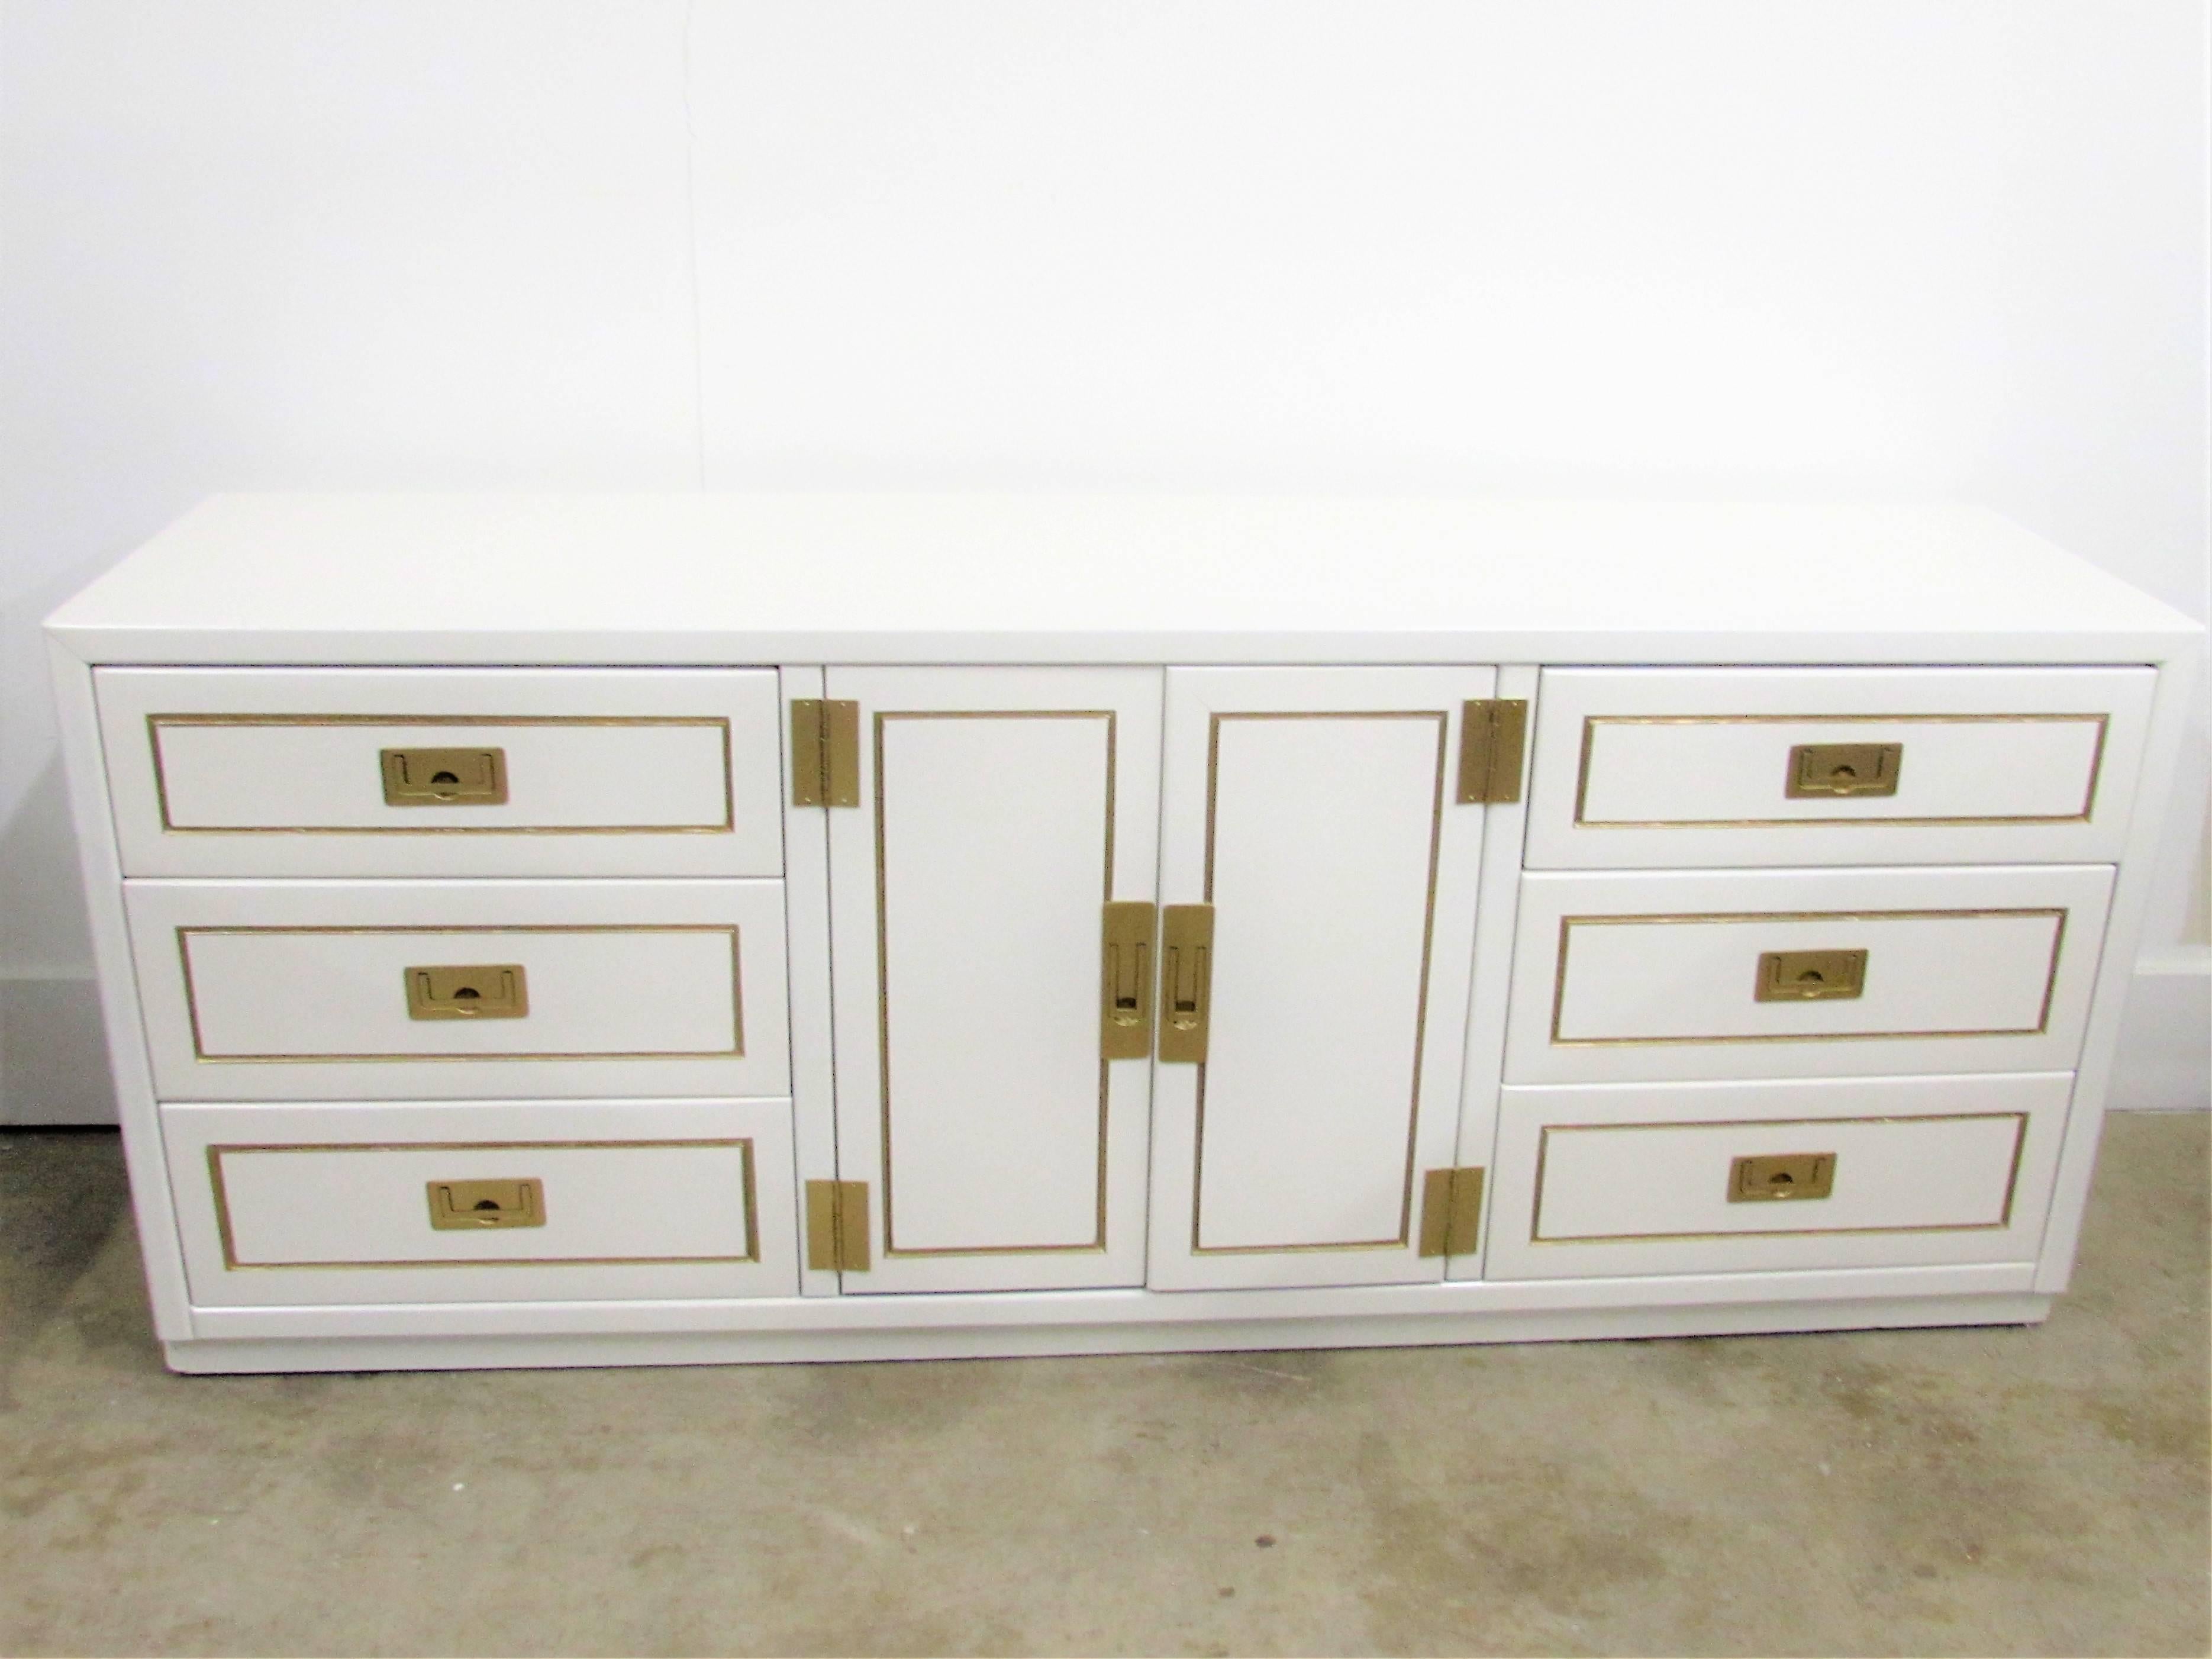 Nine-drawer lacquered campaign credenza in alabaster white gloss finish with gilded accents and recessed campaign hardware in our custom gold under brass. Three dovetail drawers are on each side of two swinging doors that open to three additional